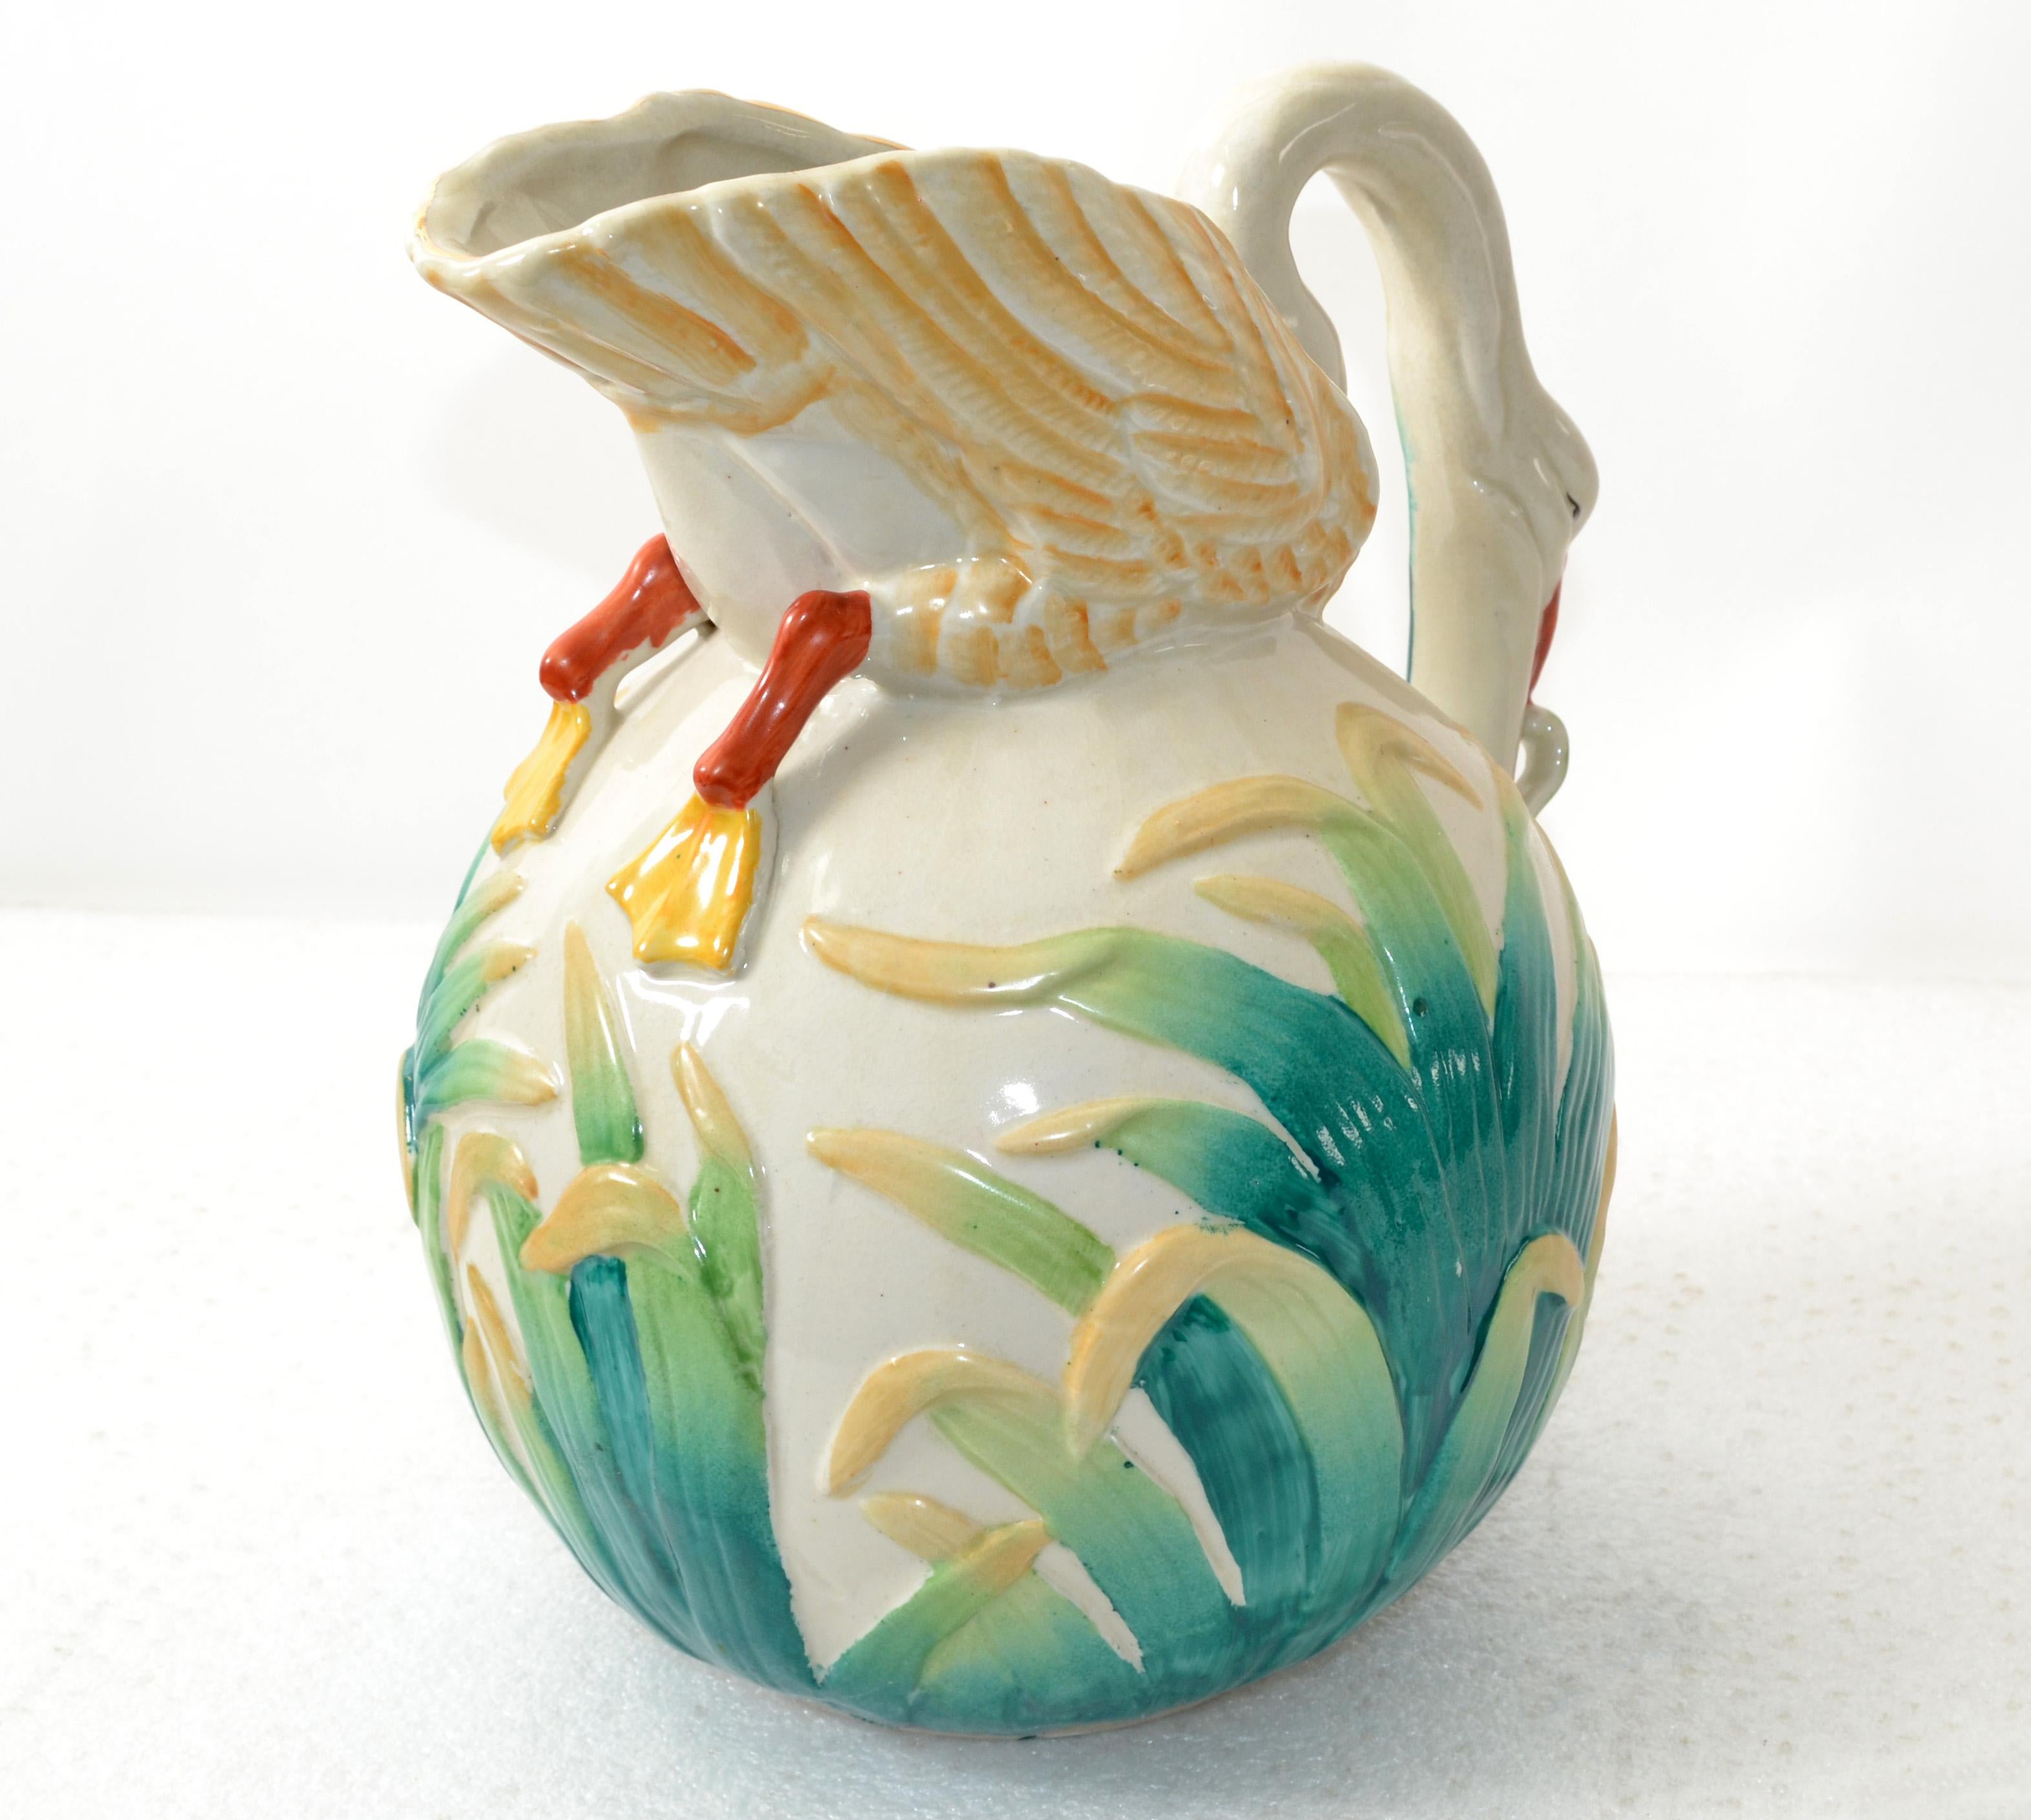 This Victorian water pitcher antique glazed and hand painted ceramic jar, decanter was made in Japan, circa 1890.
The Pitcher themed a Swan grassing in a rice field. The opening has a Gold Leaf Border.
This colorful Pitcher is in very good